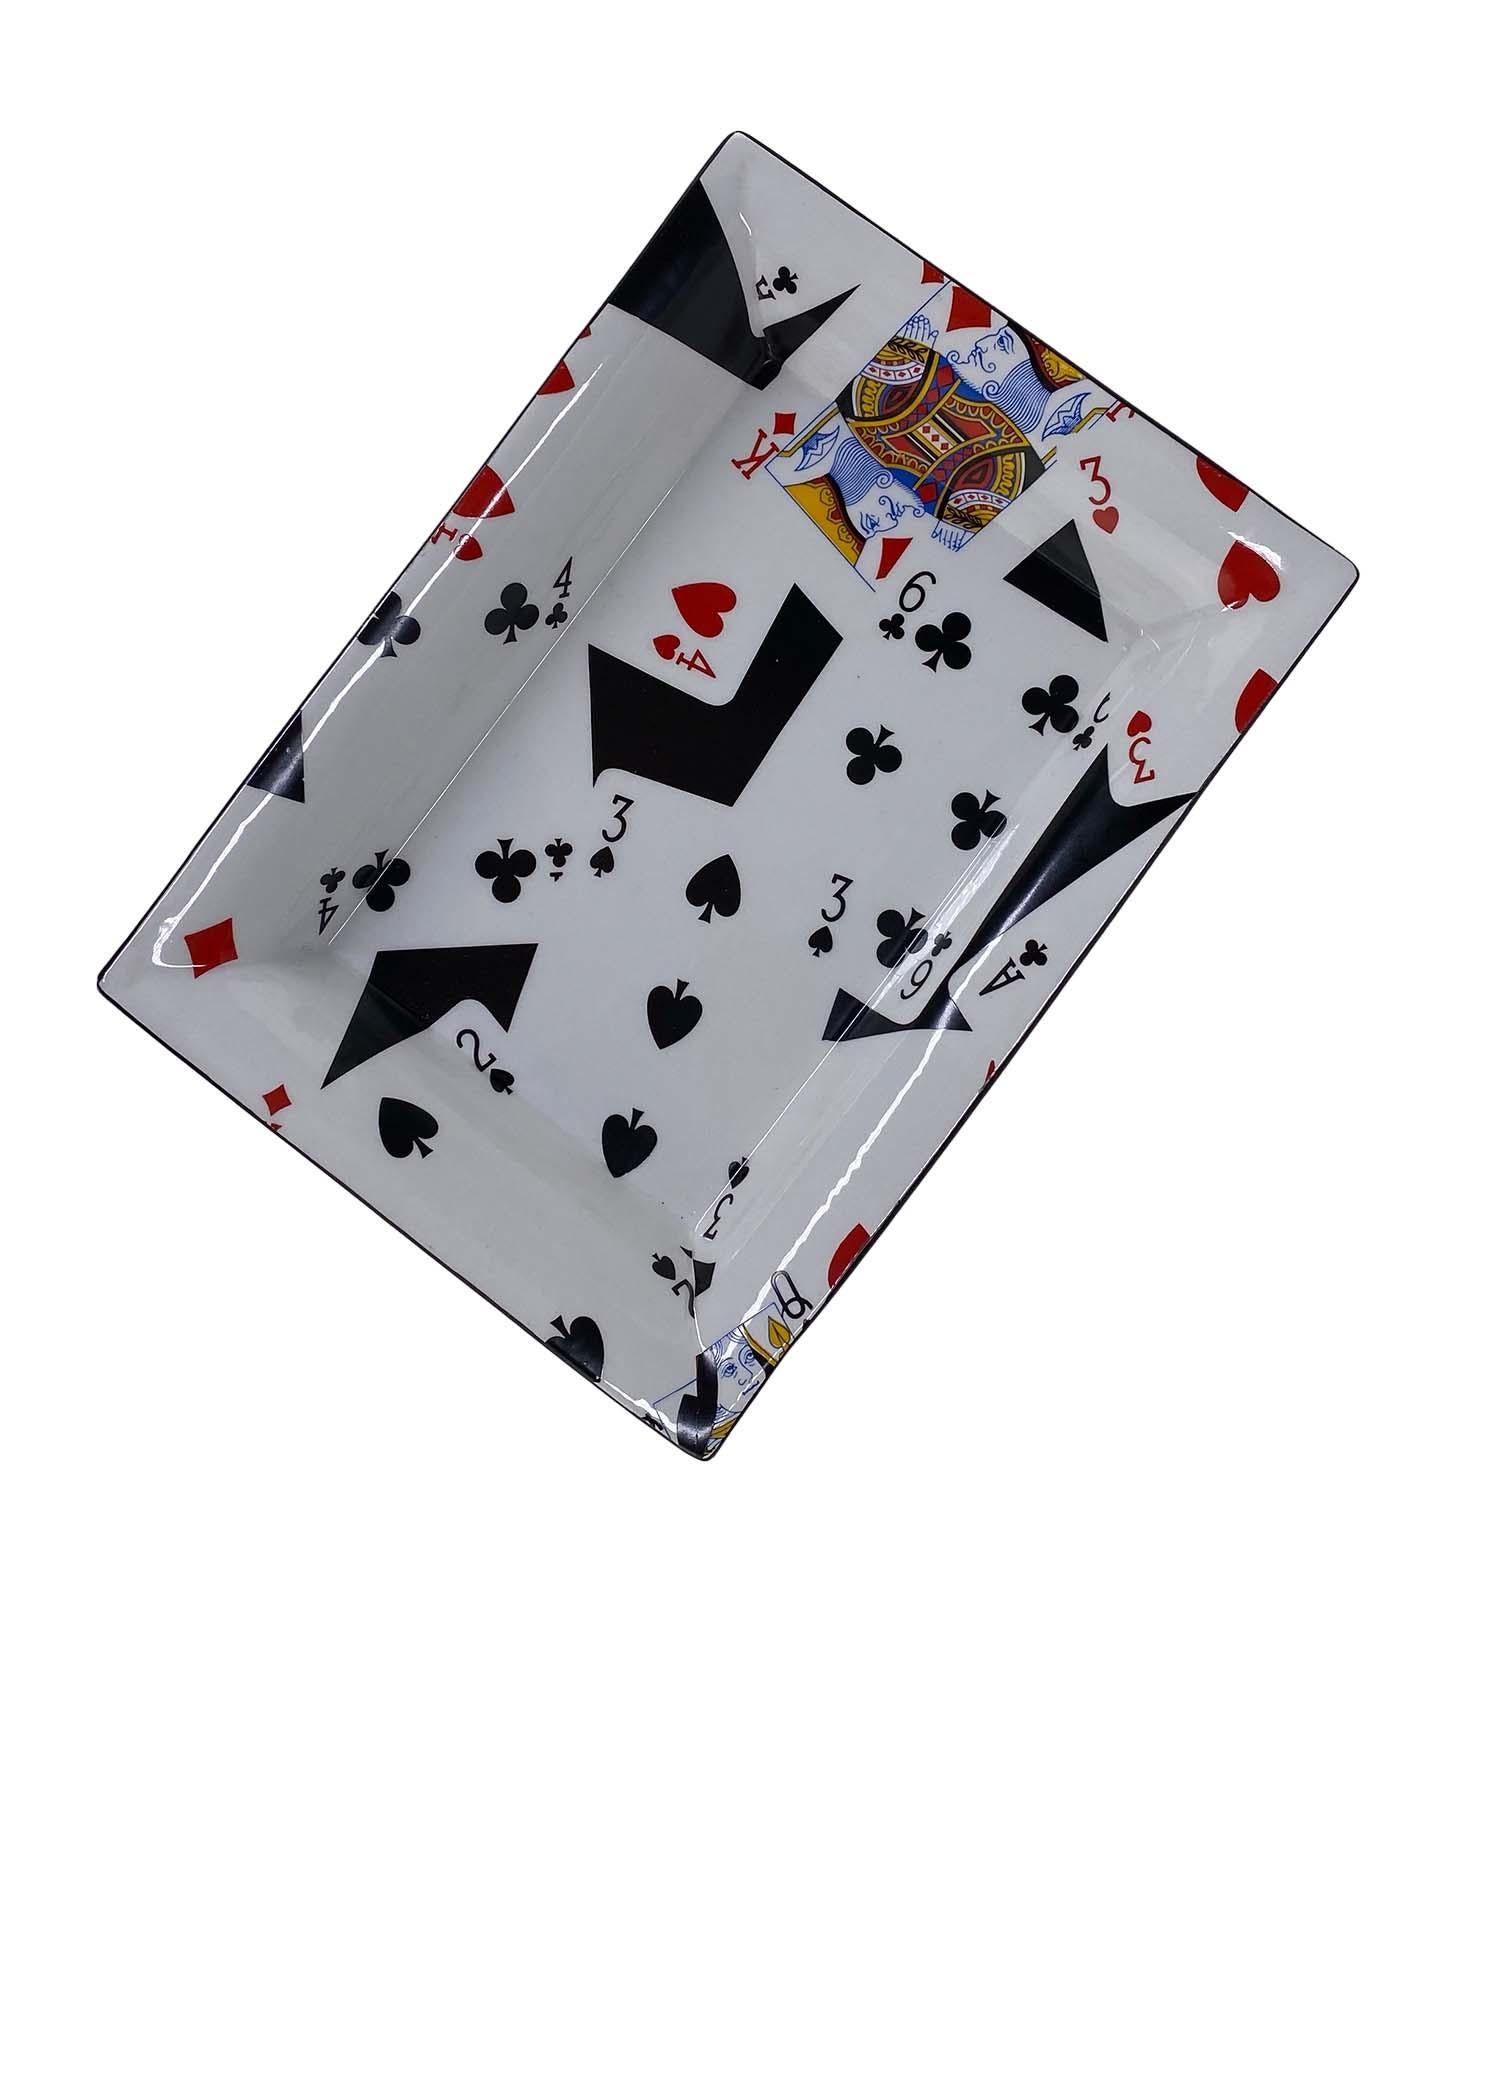 gucci playing cards